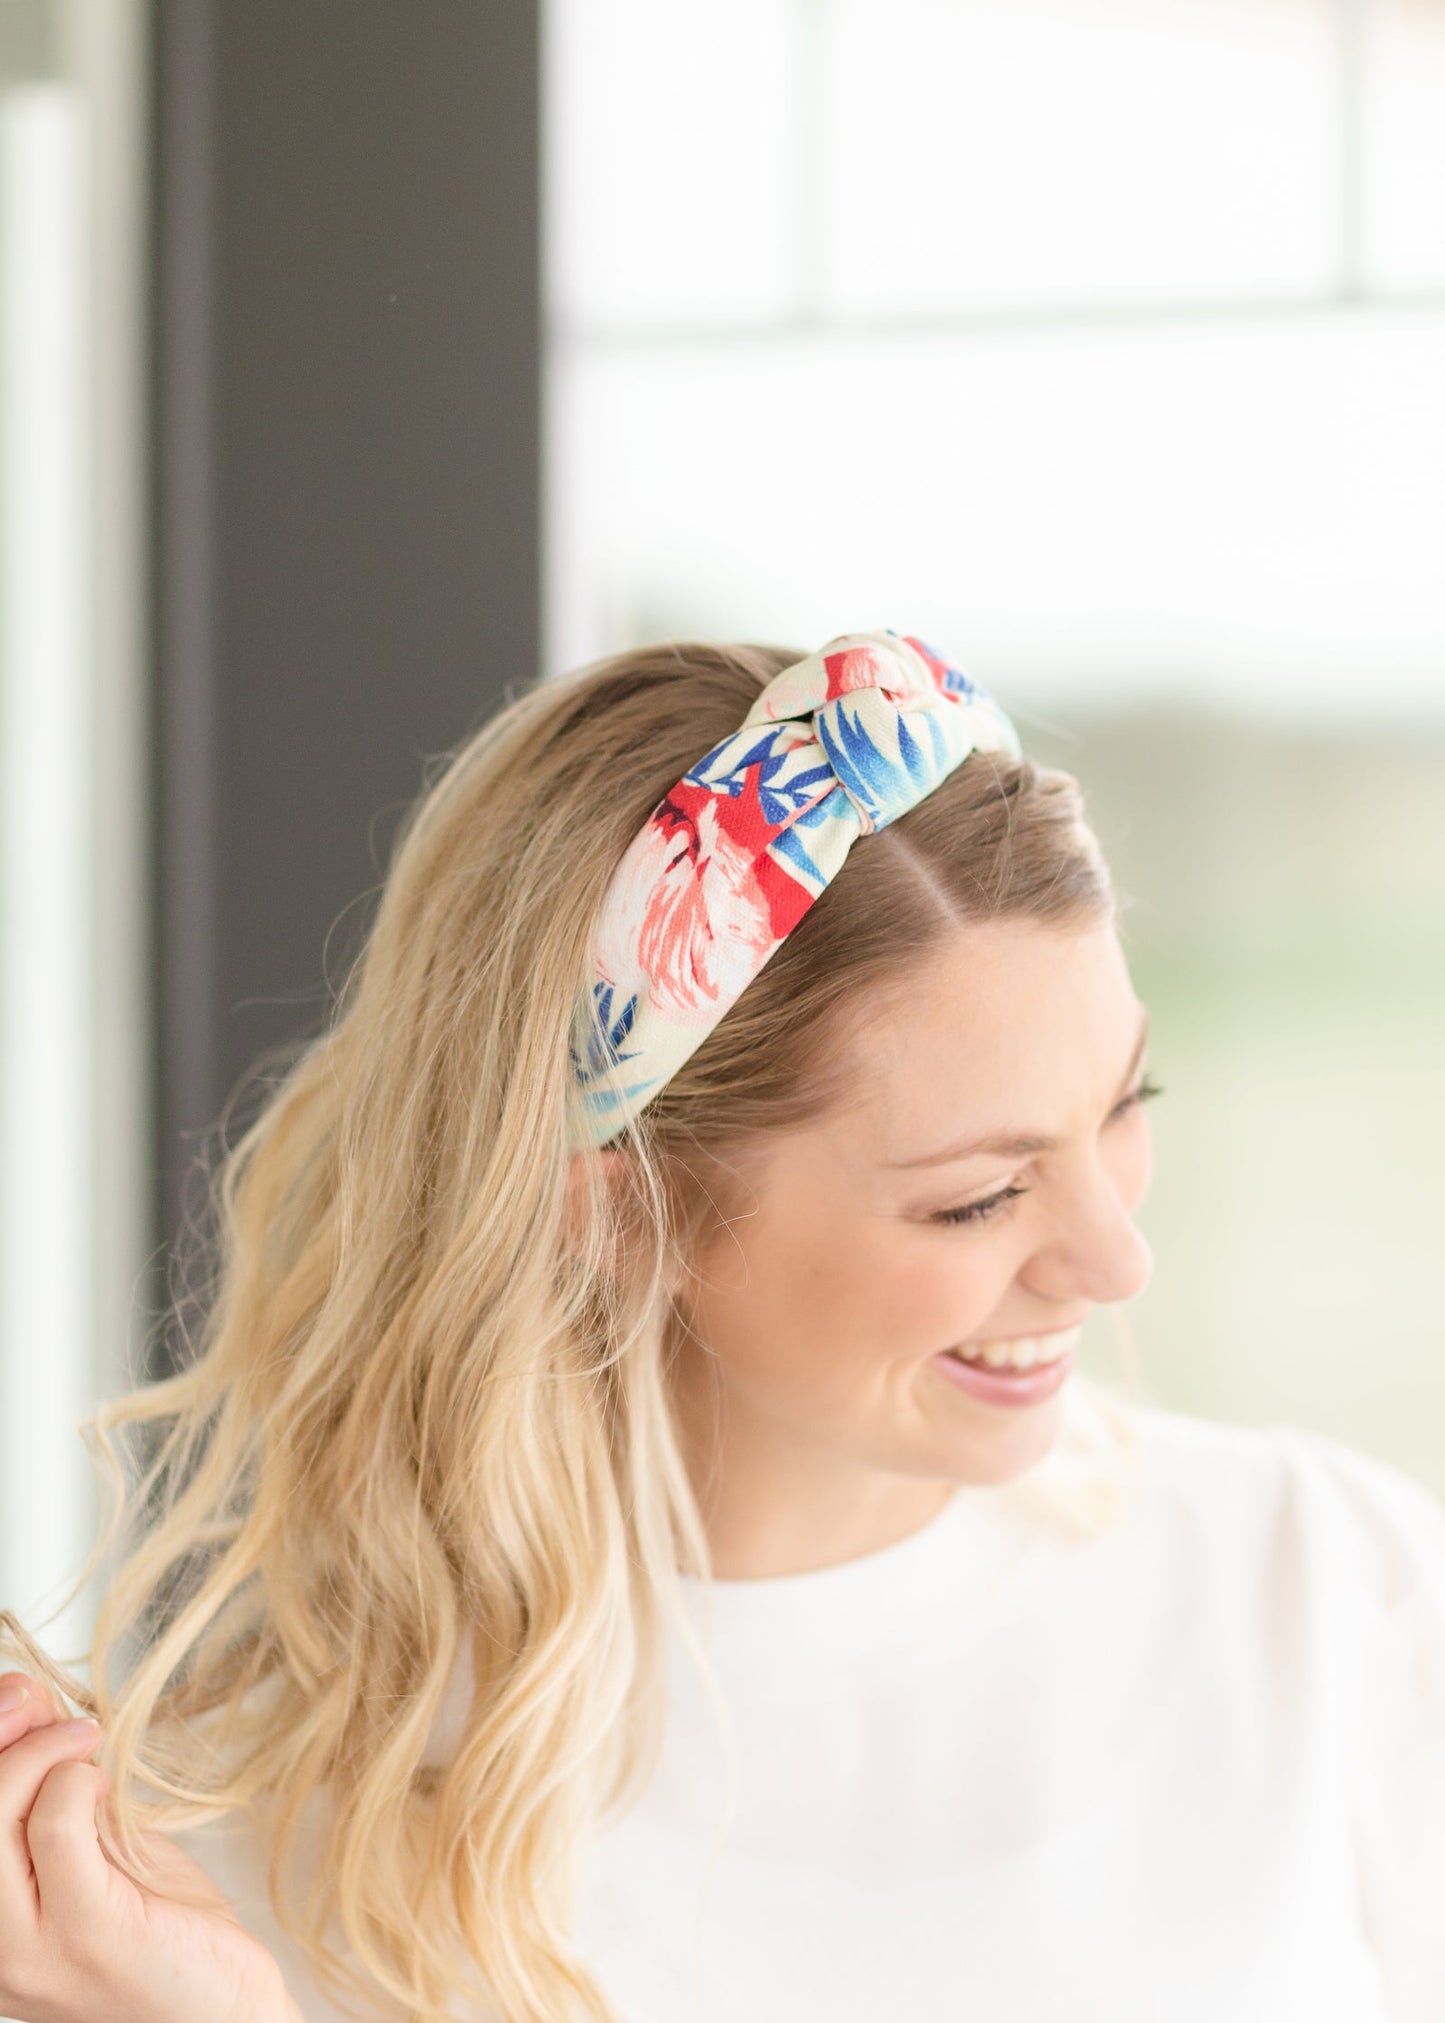 Tropical Print Knotted Headband - FINAL SALE Accessories